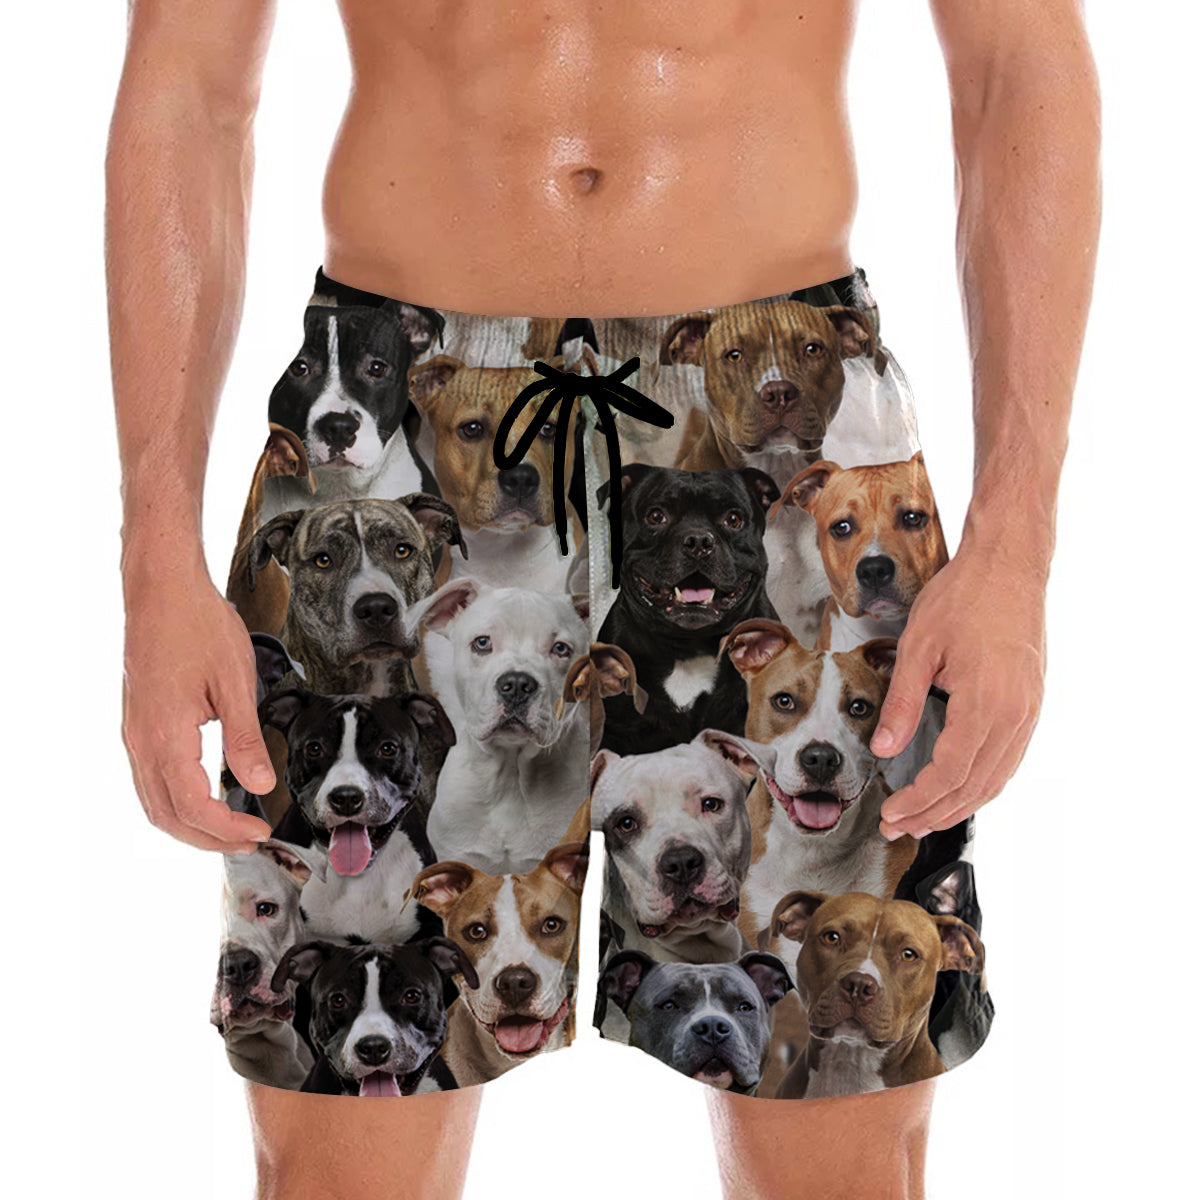 You Will Have A Bunch Of Staffordshire Bull Terriers - Shorts V1